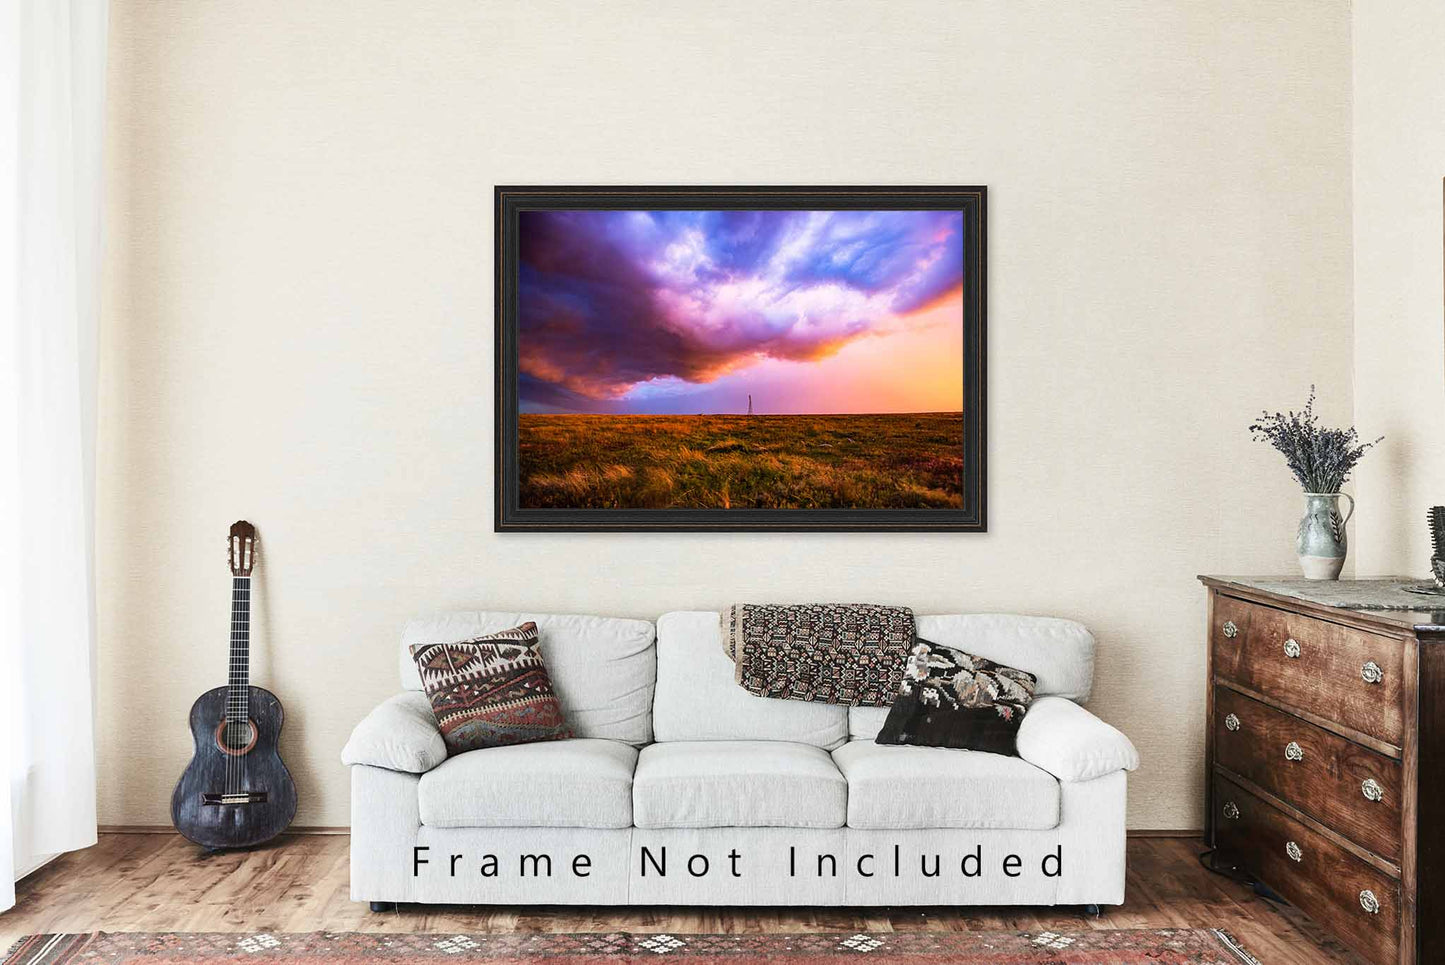 Thunderstorm Photography Print - Picture of Colorful Storm Clouds Over Windmill on Spring Evening in Oklahoma - Western Sky Photo Decor